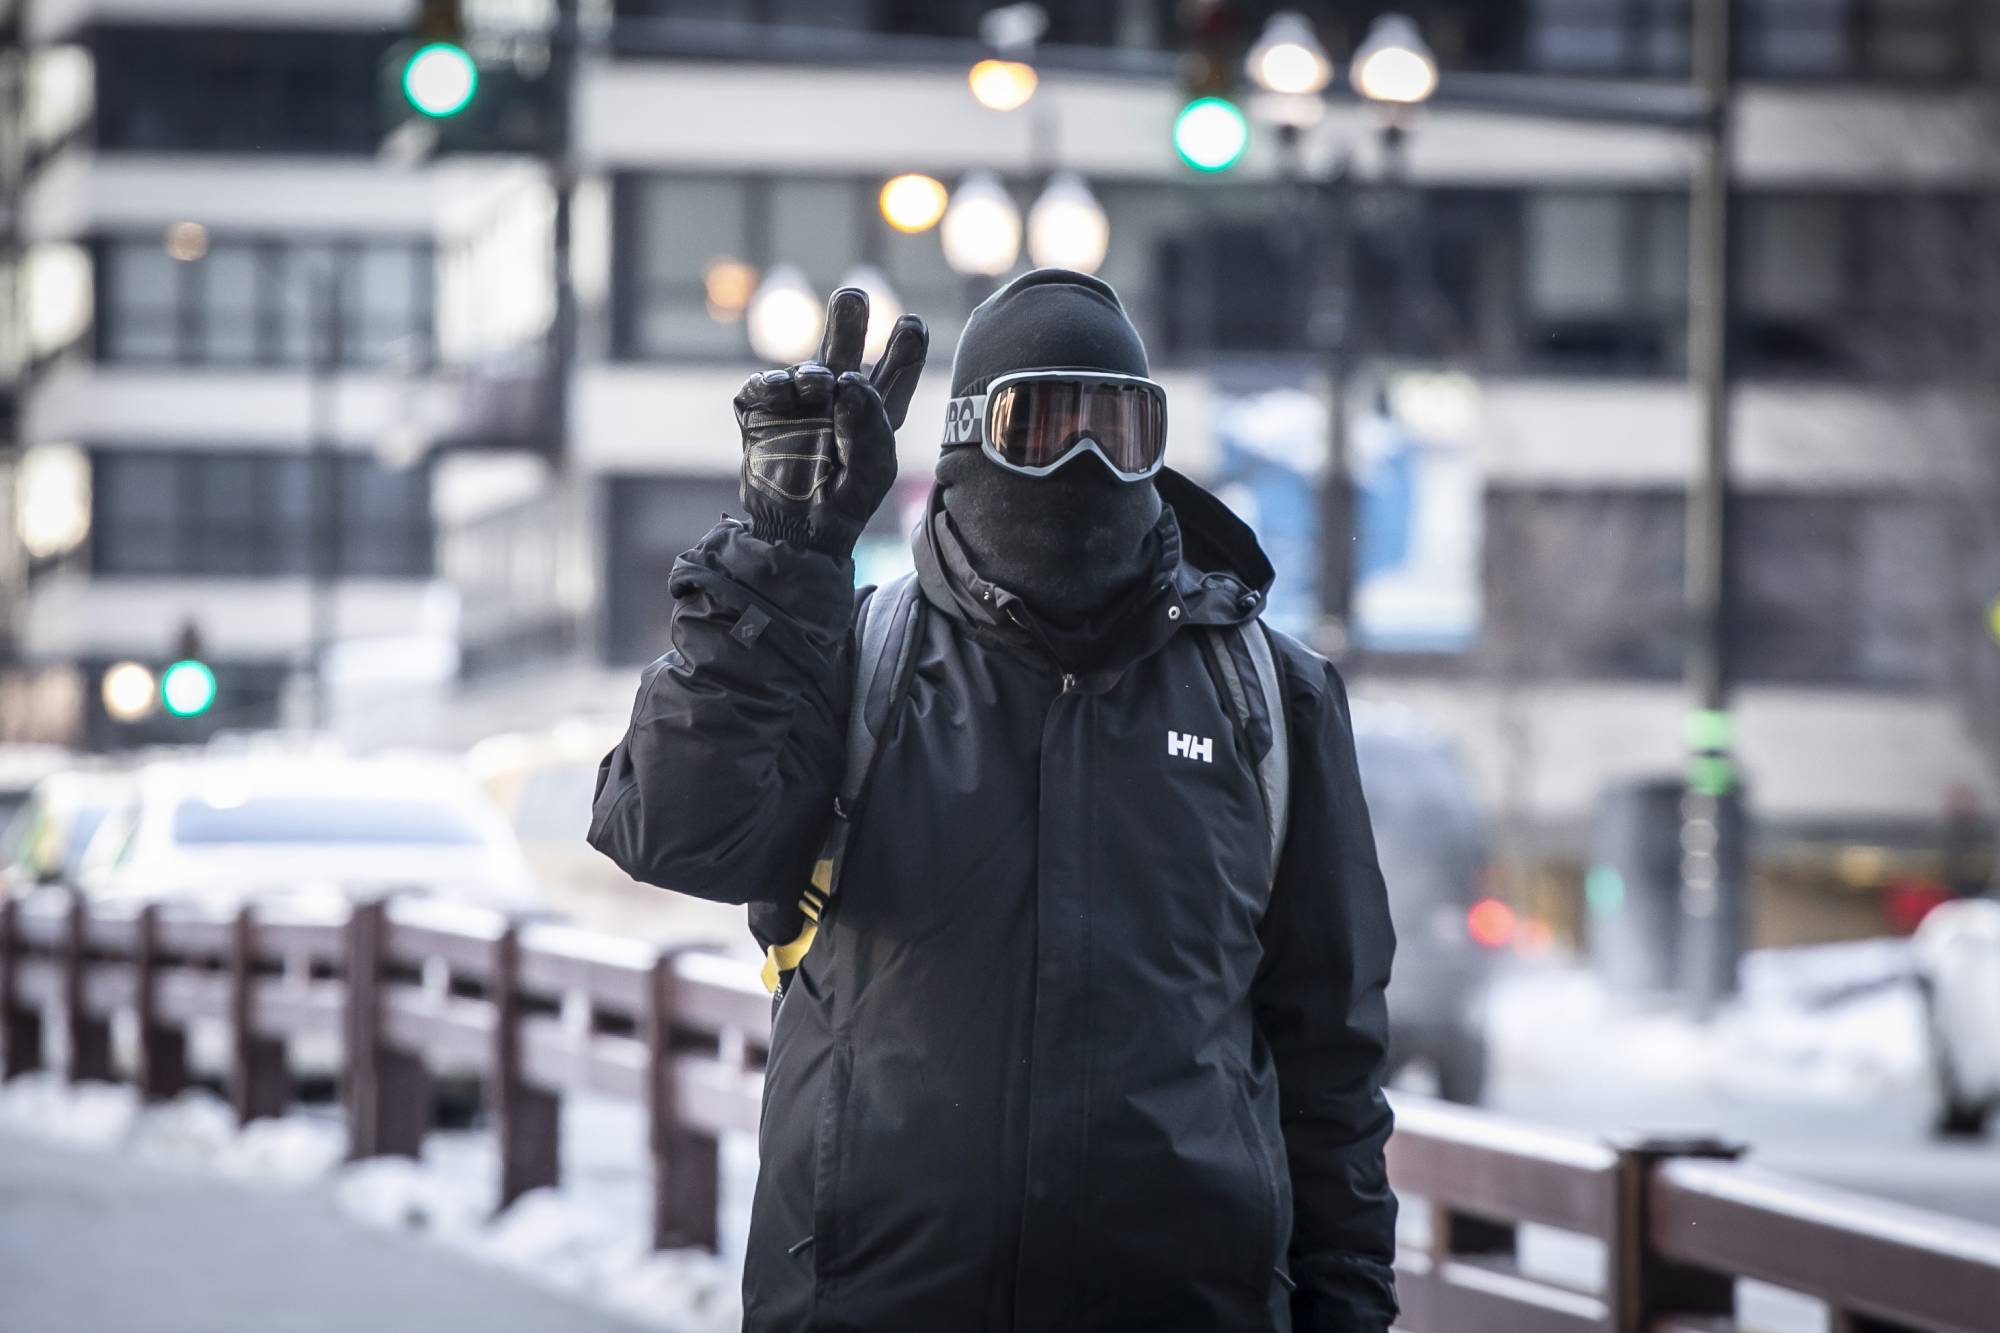 A bundled-up commuter makes their way through the loop early Wednesday, Jan. 30, 2019 in Chicago.  A deadly arctic deep freeze enveloped the Midwest with record-breaking temperatures triggering widespread closures of schools and businesses.  (Rich Hein/Chicago Sun-Times via AP)